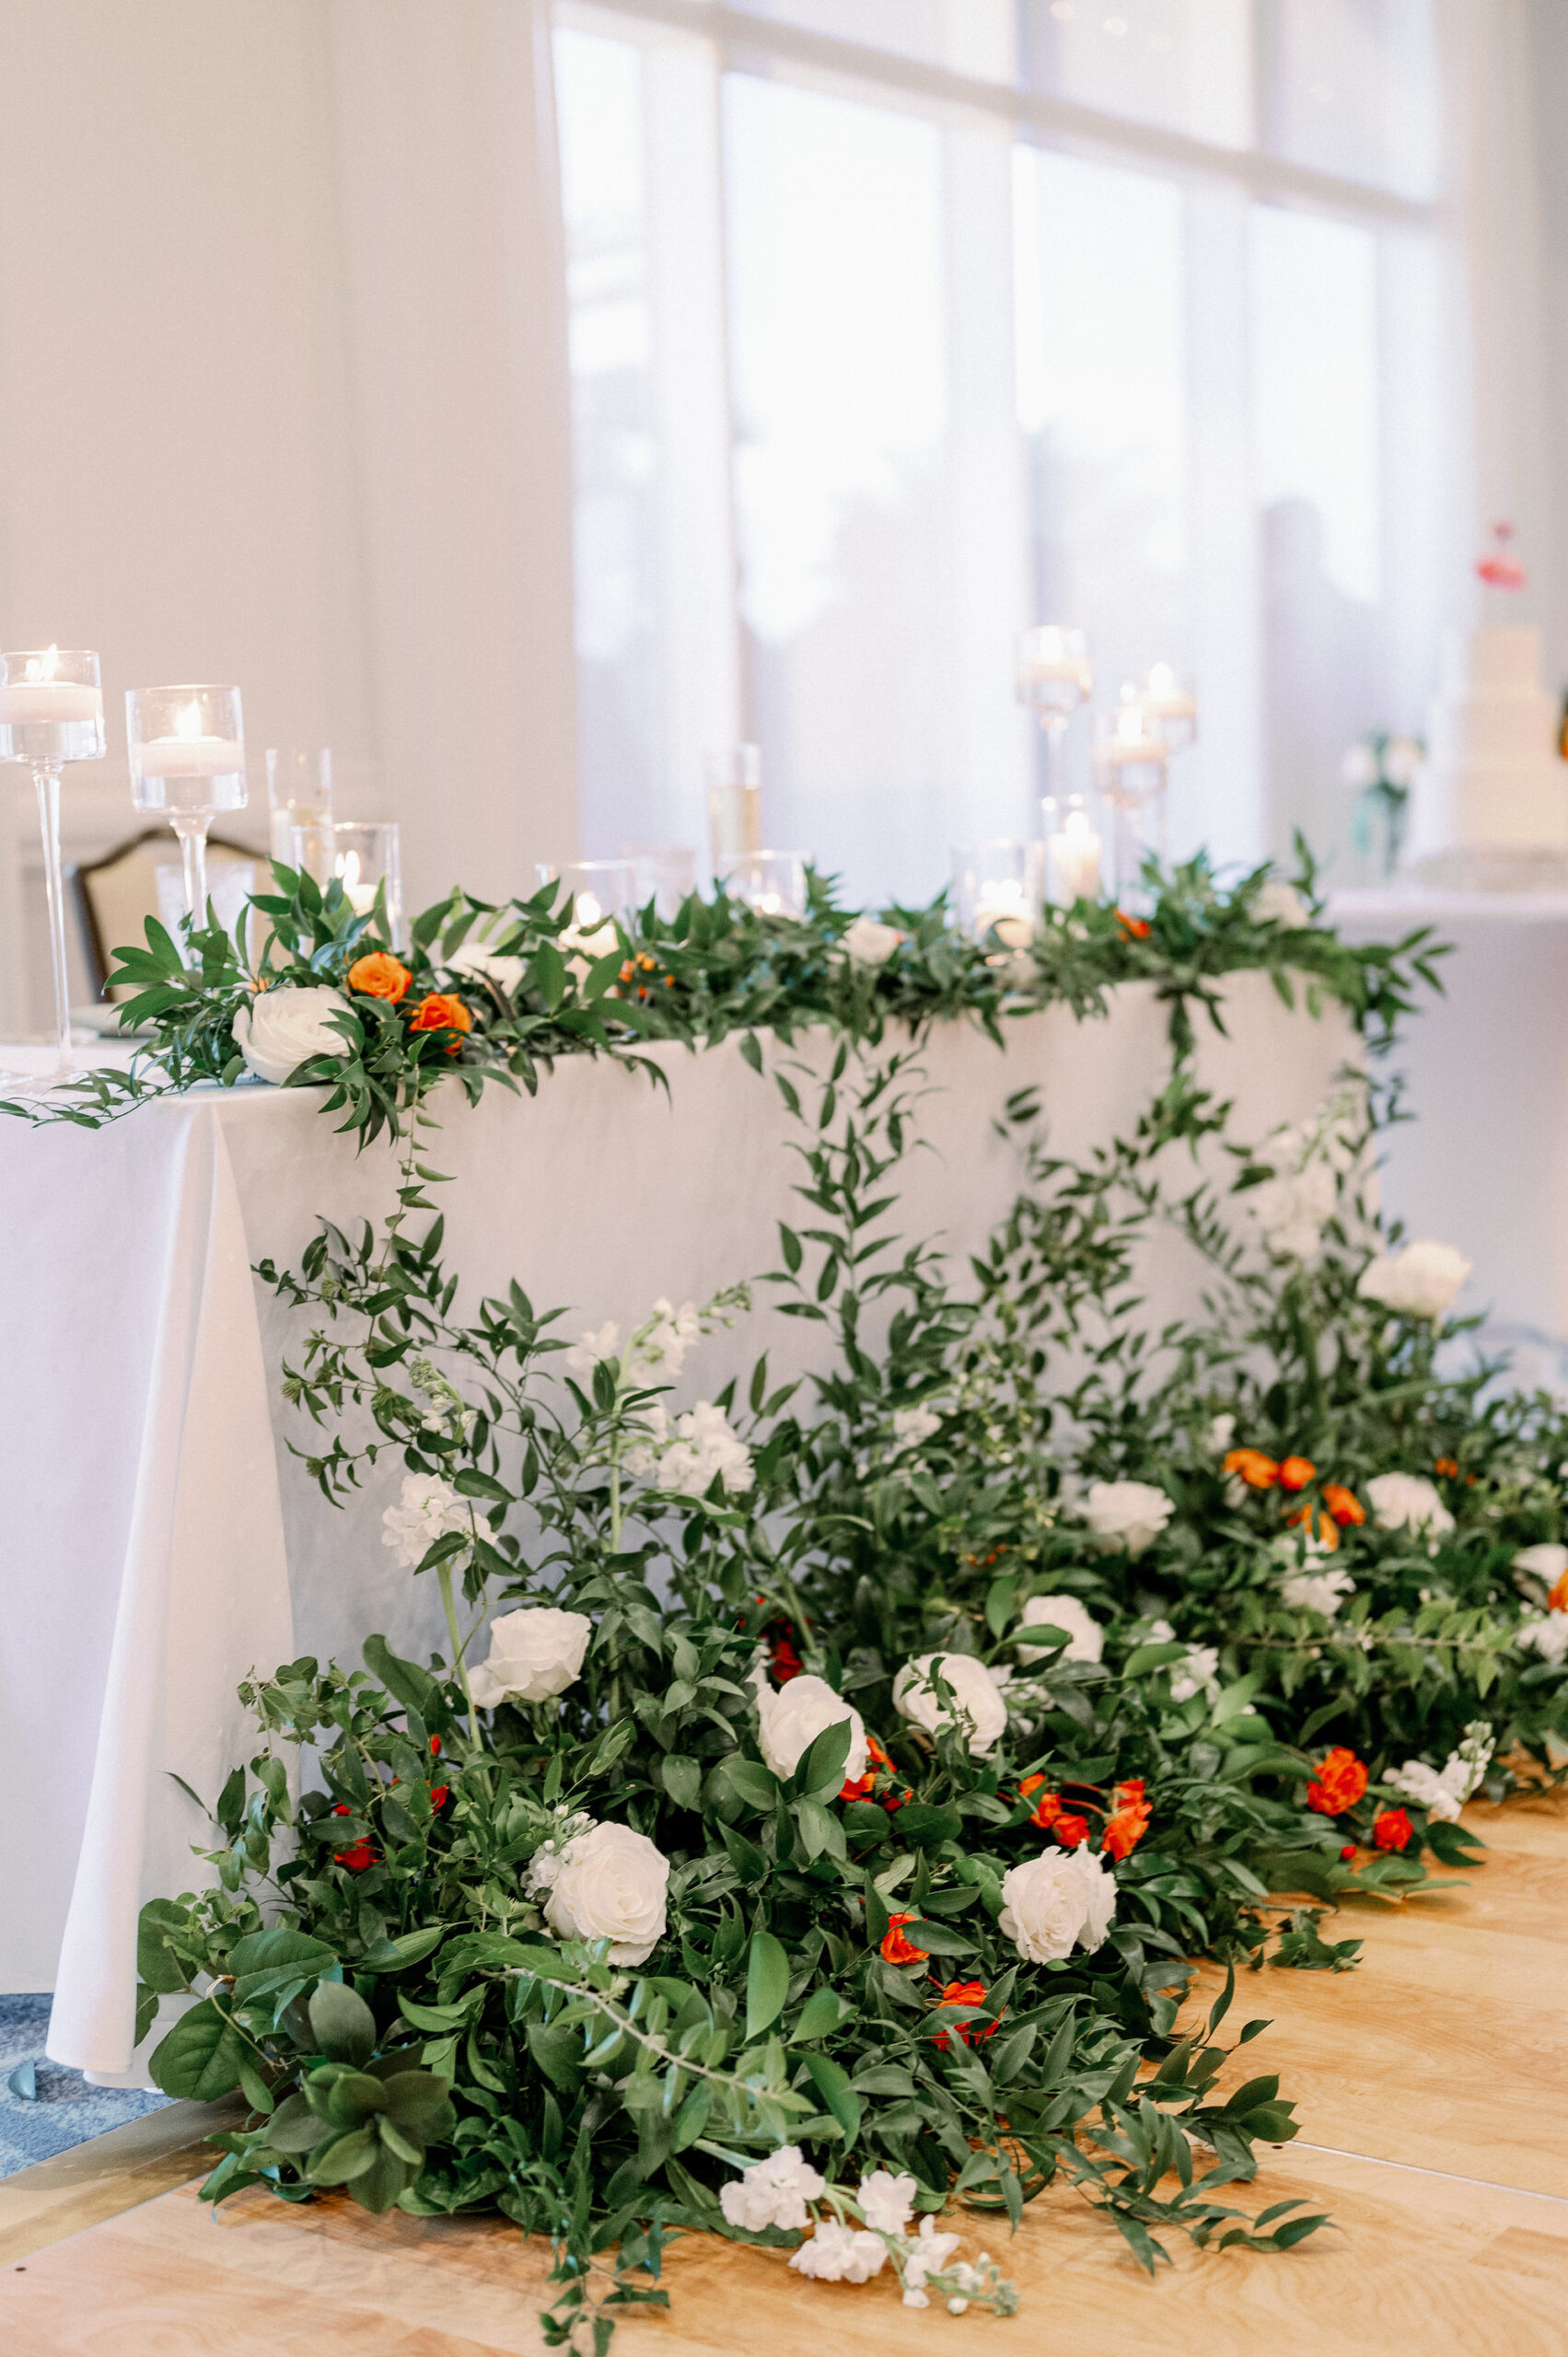 White Linen Sweetheart Tablescape with Greenery, Orange Floral Details and White Candles in Glass Jars | Tampa Wedding Rentals Kate Ryan Event Rentals